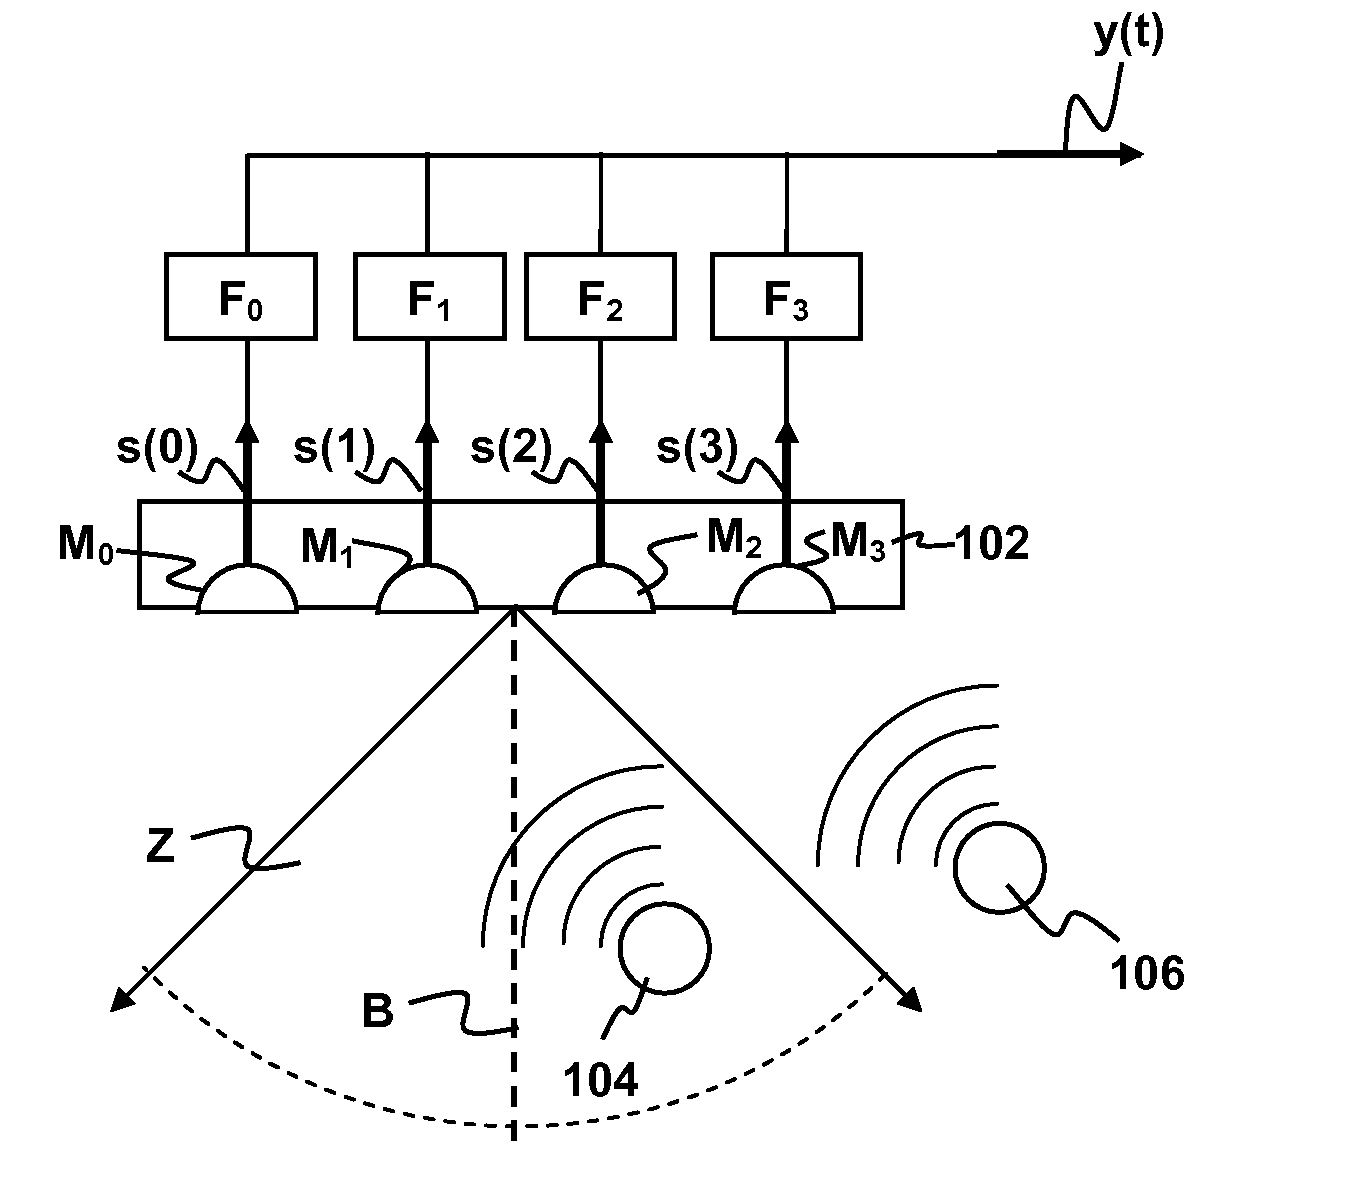 Methods and apparatus for targeted sound detection